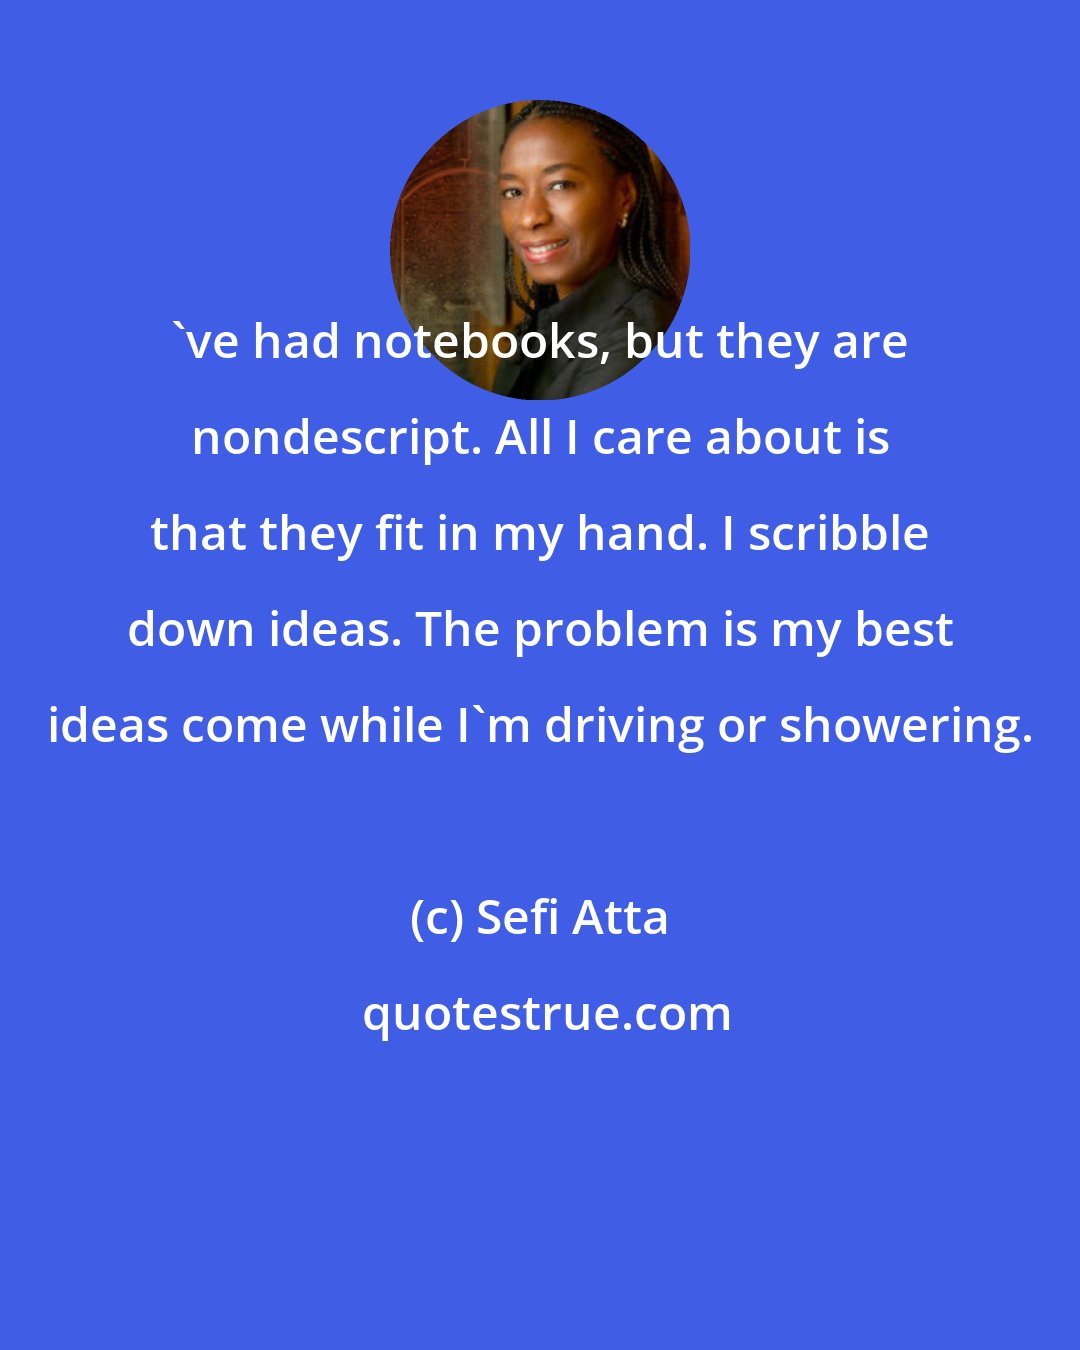 Sefi Atta: 've had notebooks, but they are nondescript. All I care about is that they fit in my hand. I scribble down ideas. The problem is my best ideas come while I'm driving or showering.